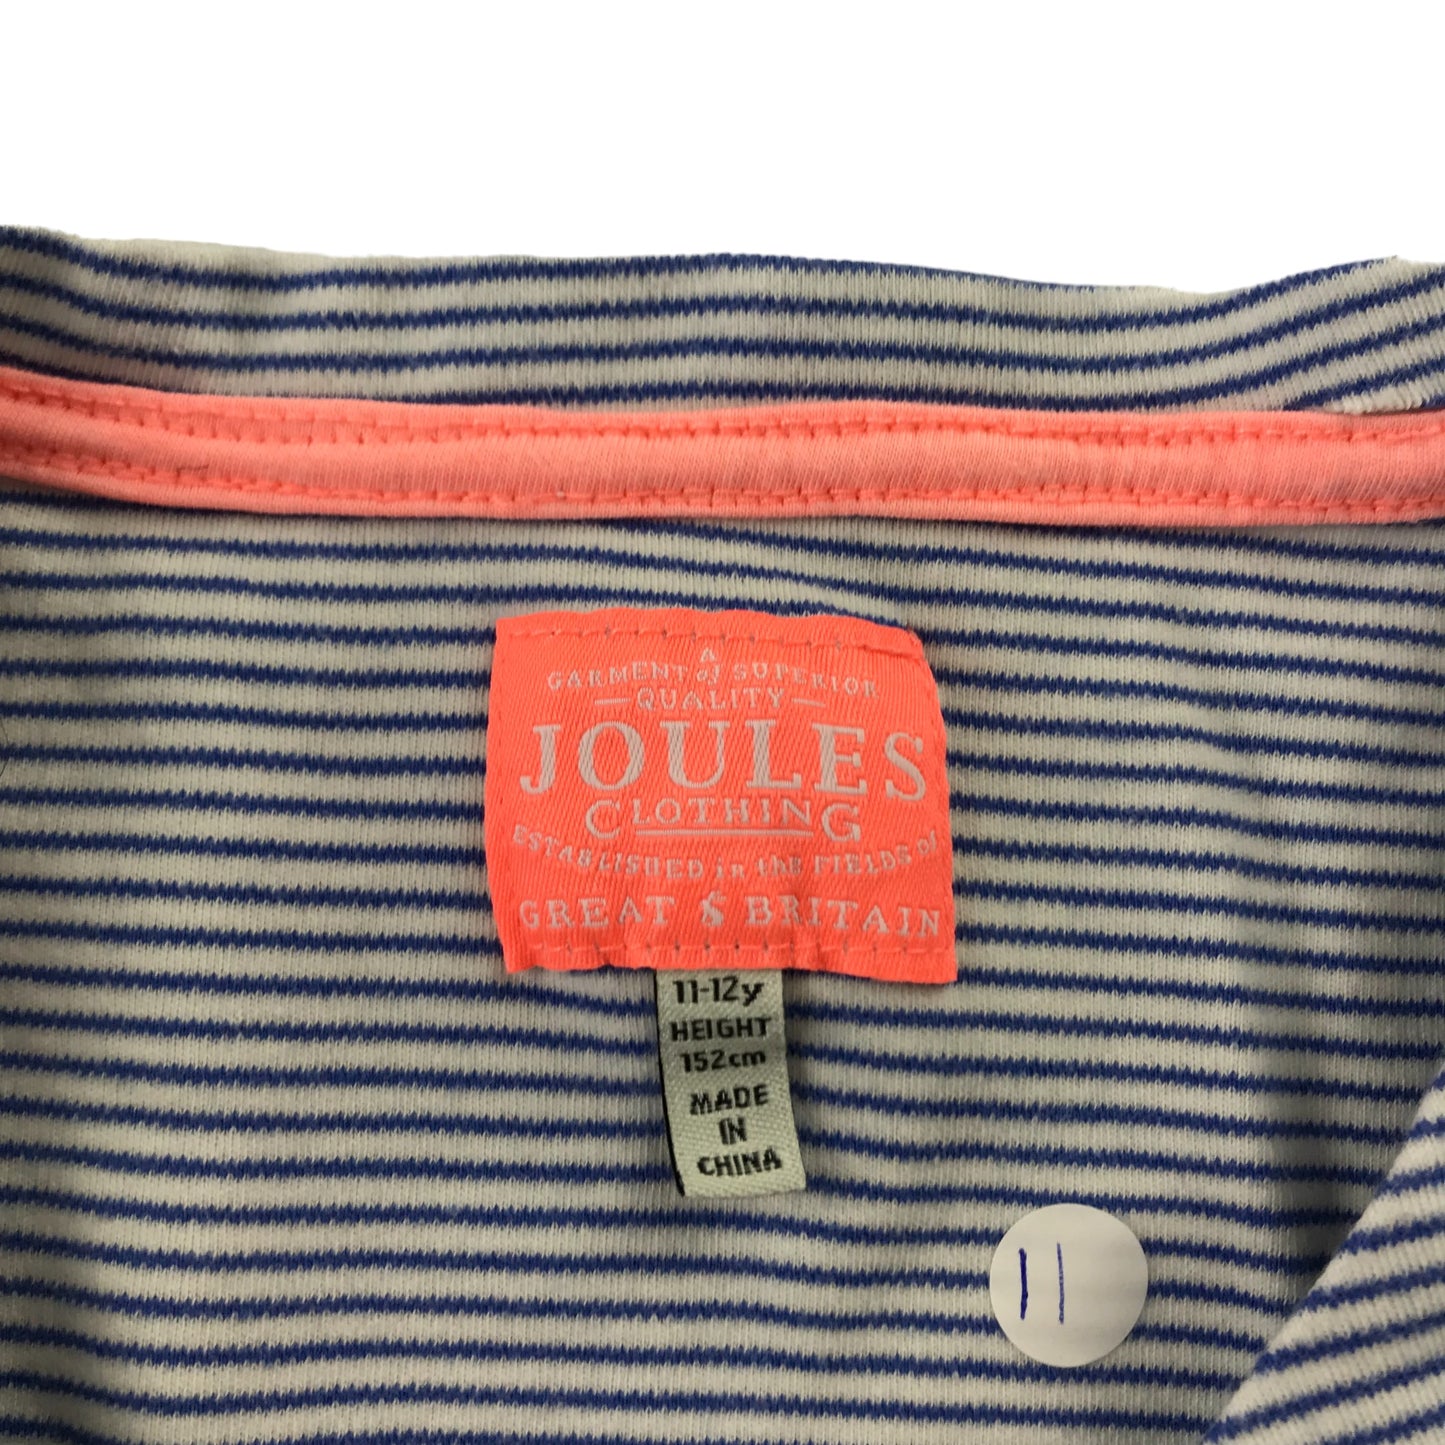 Joules T-shirt 11-12 years navy and white stripy cotton